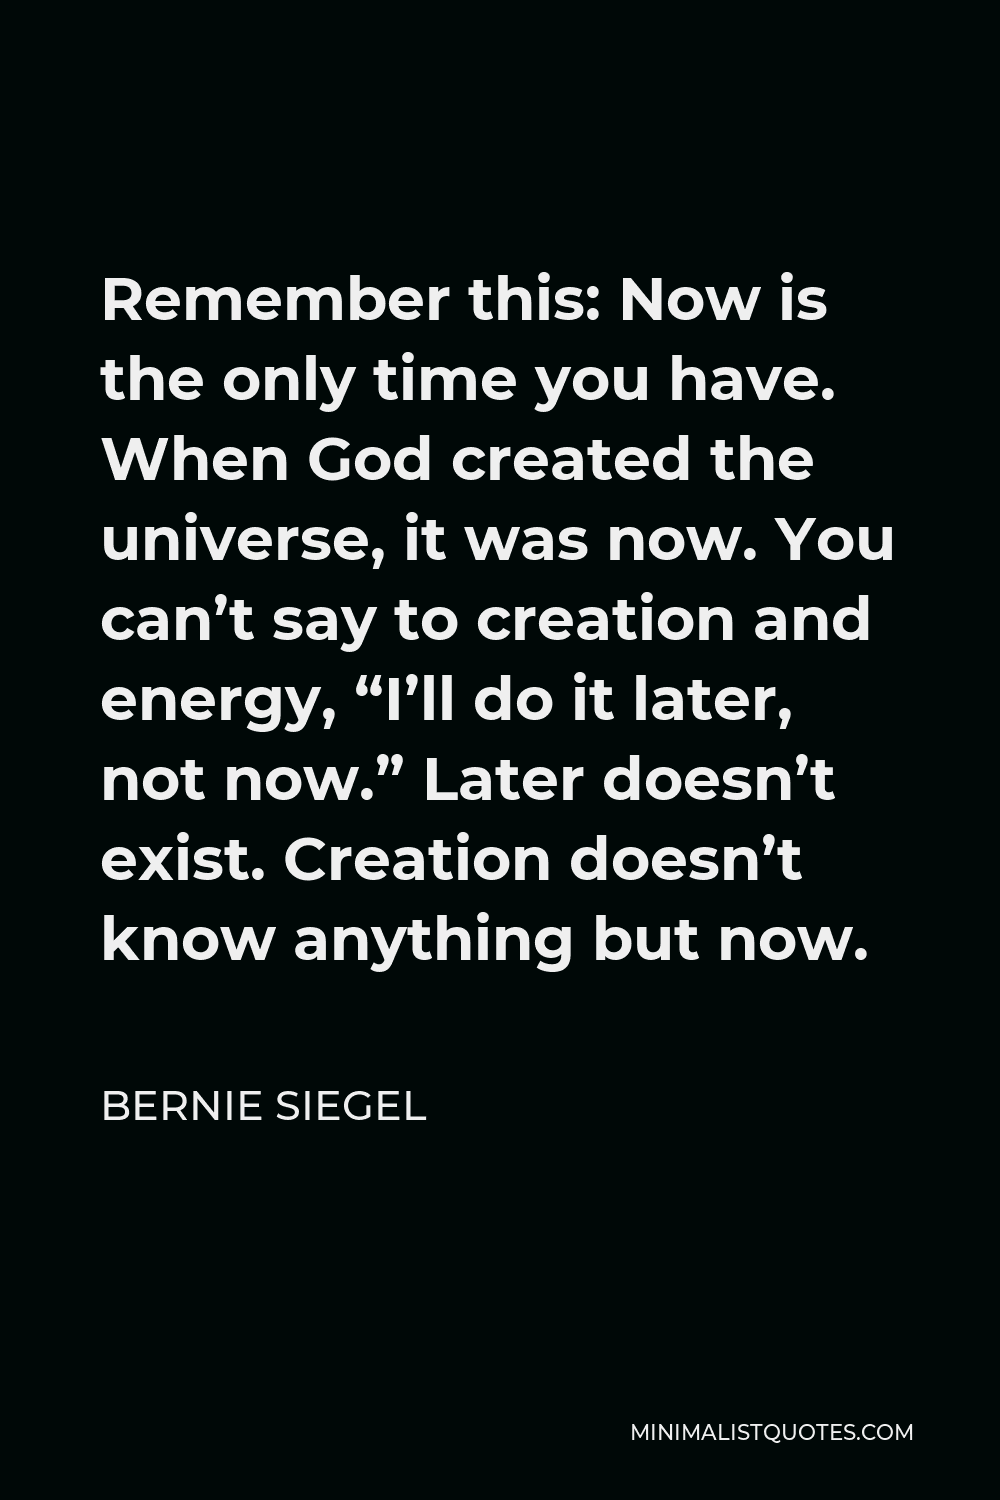 Bernie Siegel Quote - Remember this: Now is the only time you have. When God created the universe, it was now. You can’t say to creation and energy, “I’ll do it later, not now.” Later doesn’t exist. Creation doesn’t know anything but now.